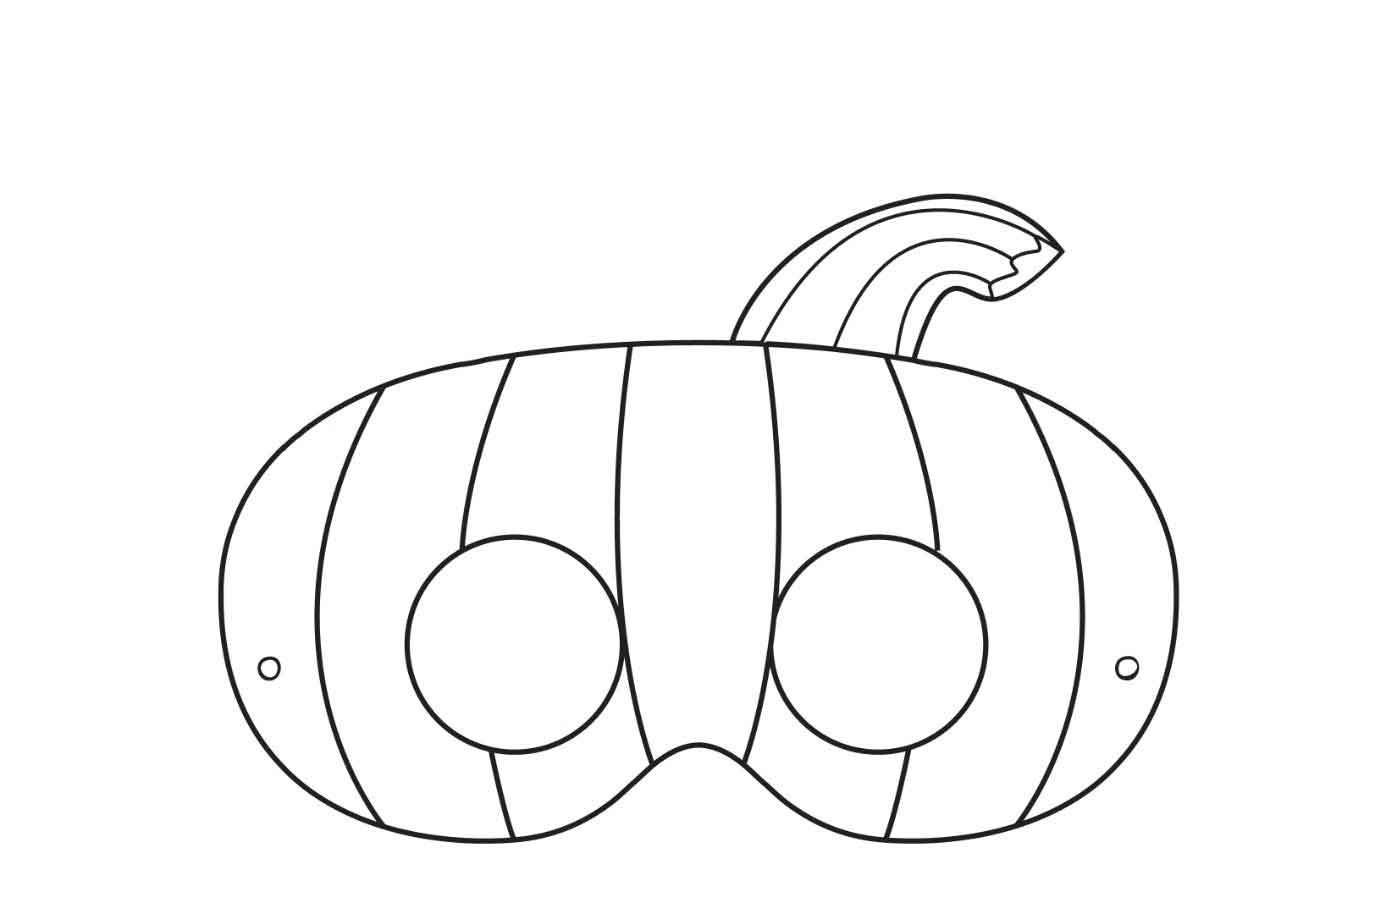 Halloween Pumpkin Mask 2 Coloring Page Free Printable Coloring Pages For Kids